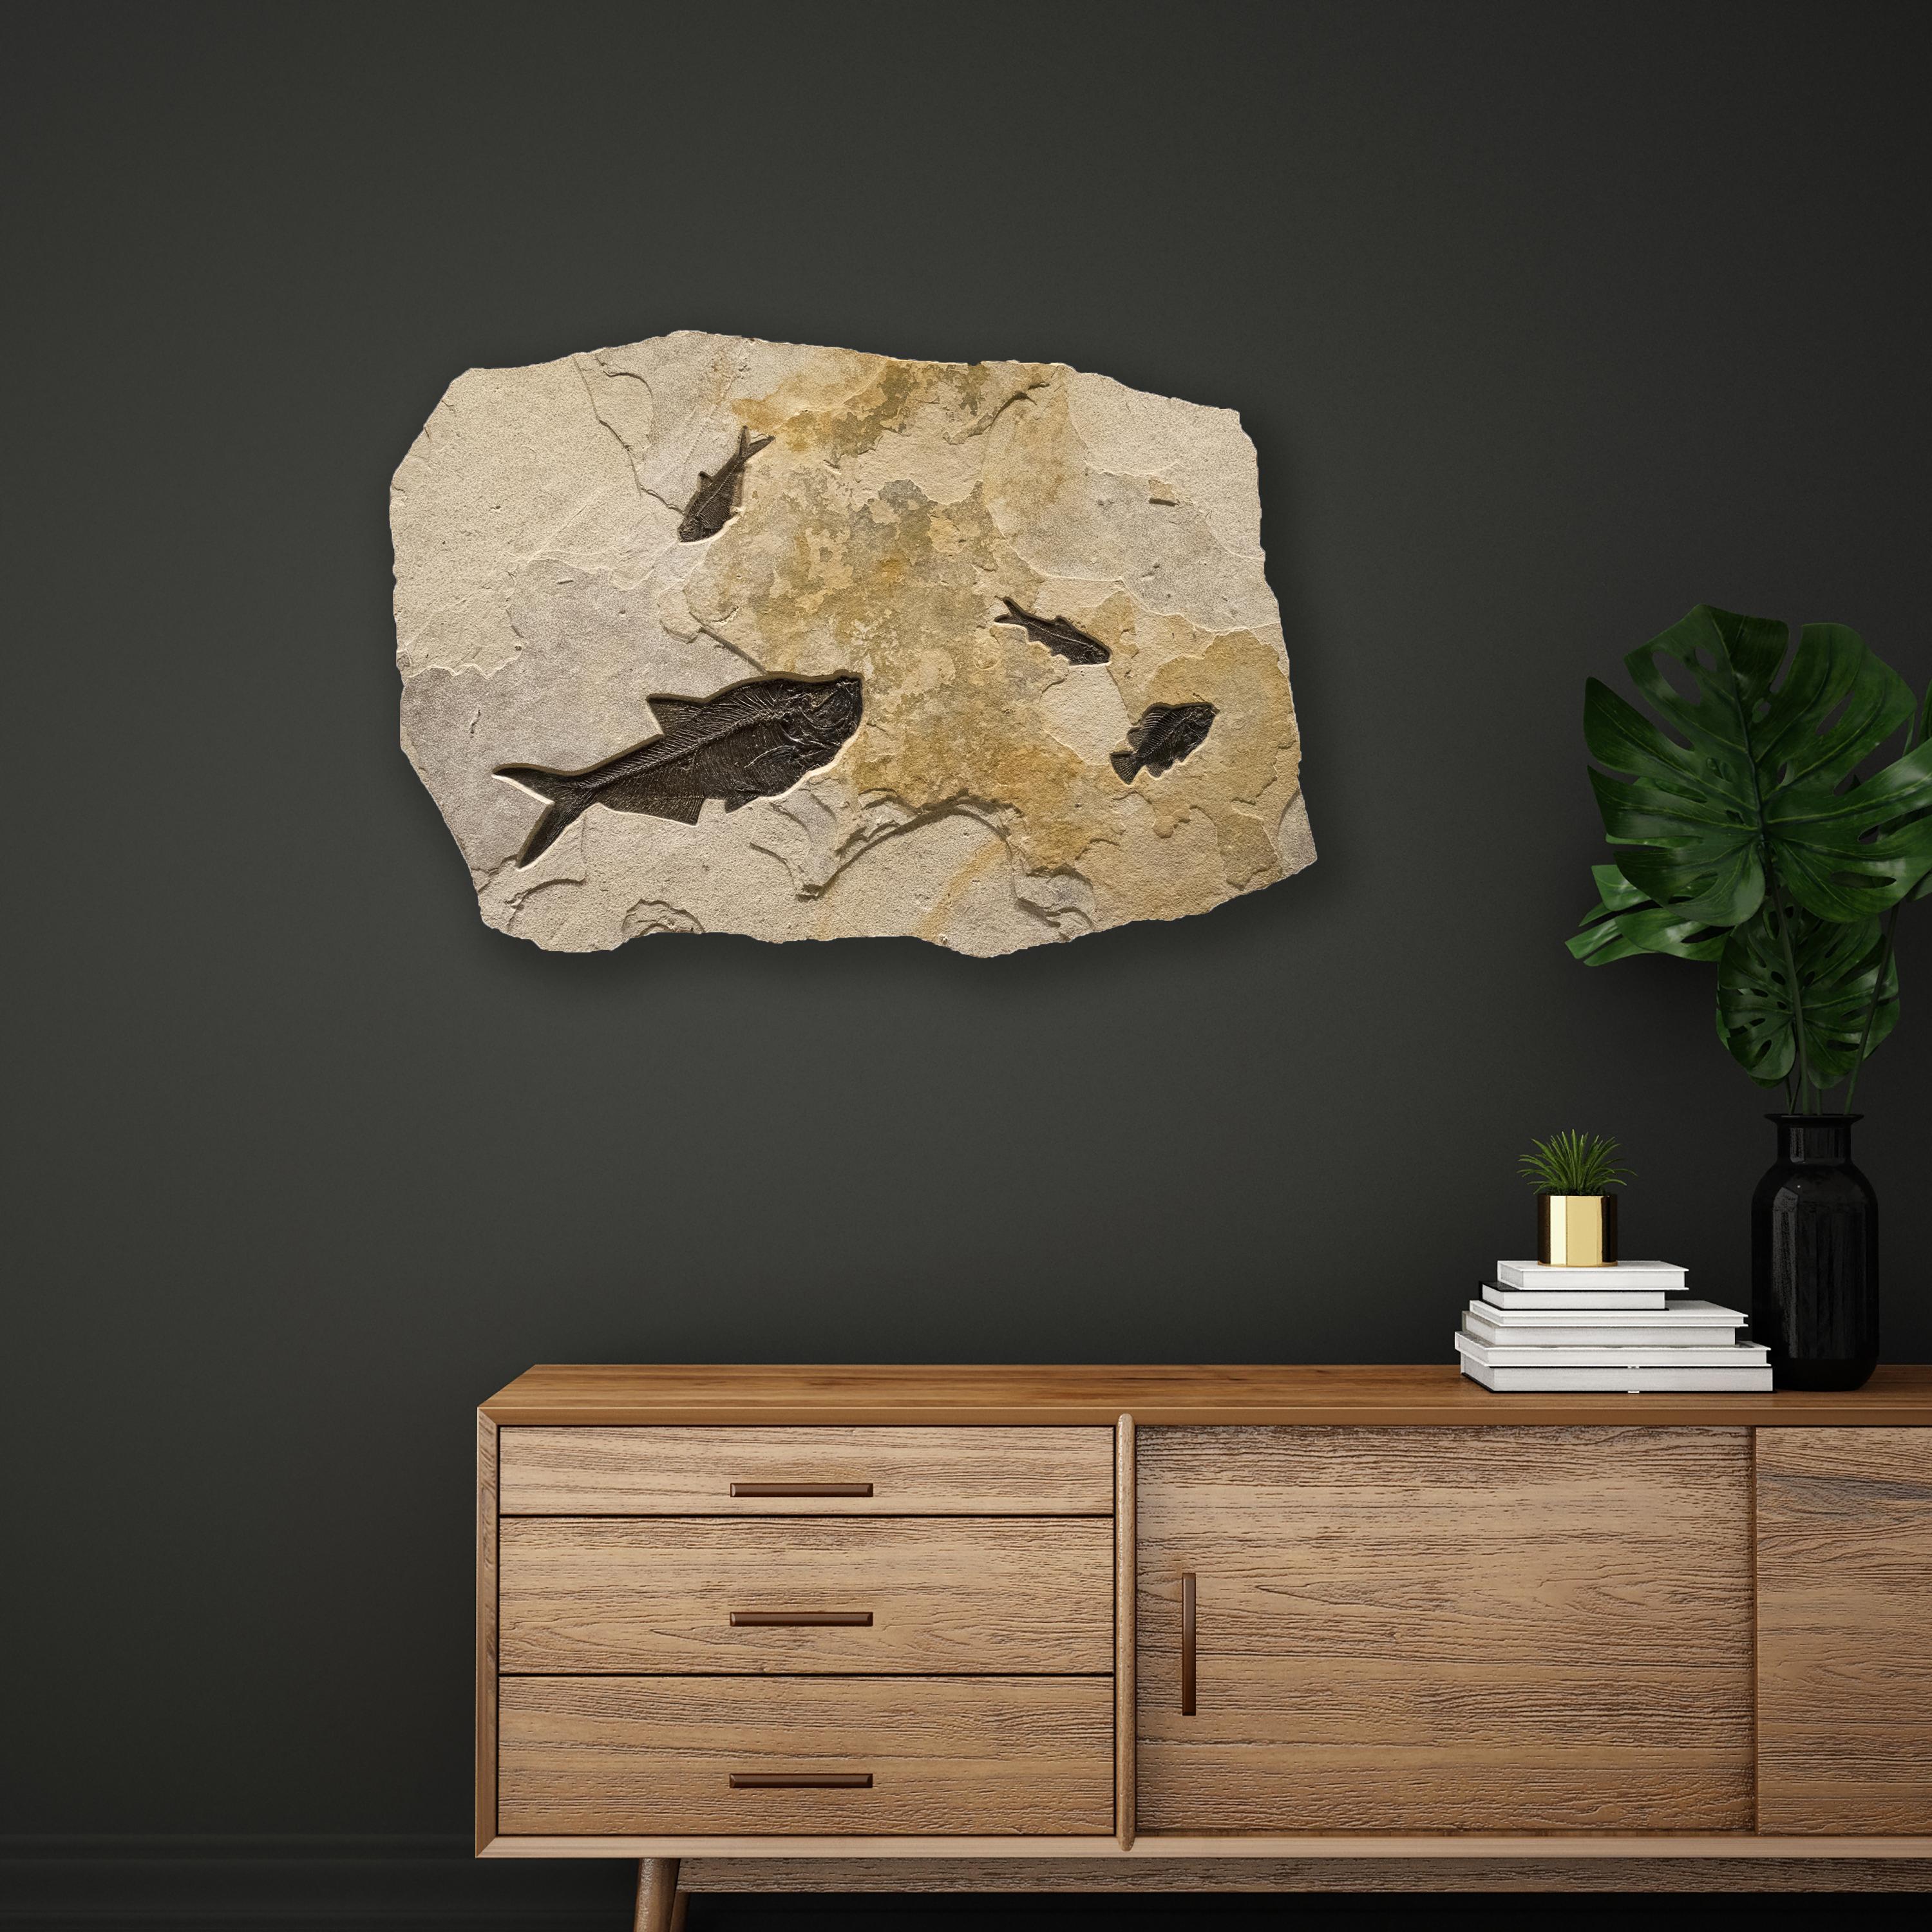 This elegant irregularly shaped fossil mural features two Diplomystus dentatus, a Cockerellites liops (formerly known as Priscacara), and a Knightia eocaena, all of which are Eocene era fossils dating back about 50 million years. These ancient fish